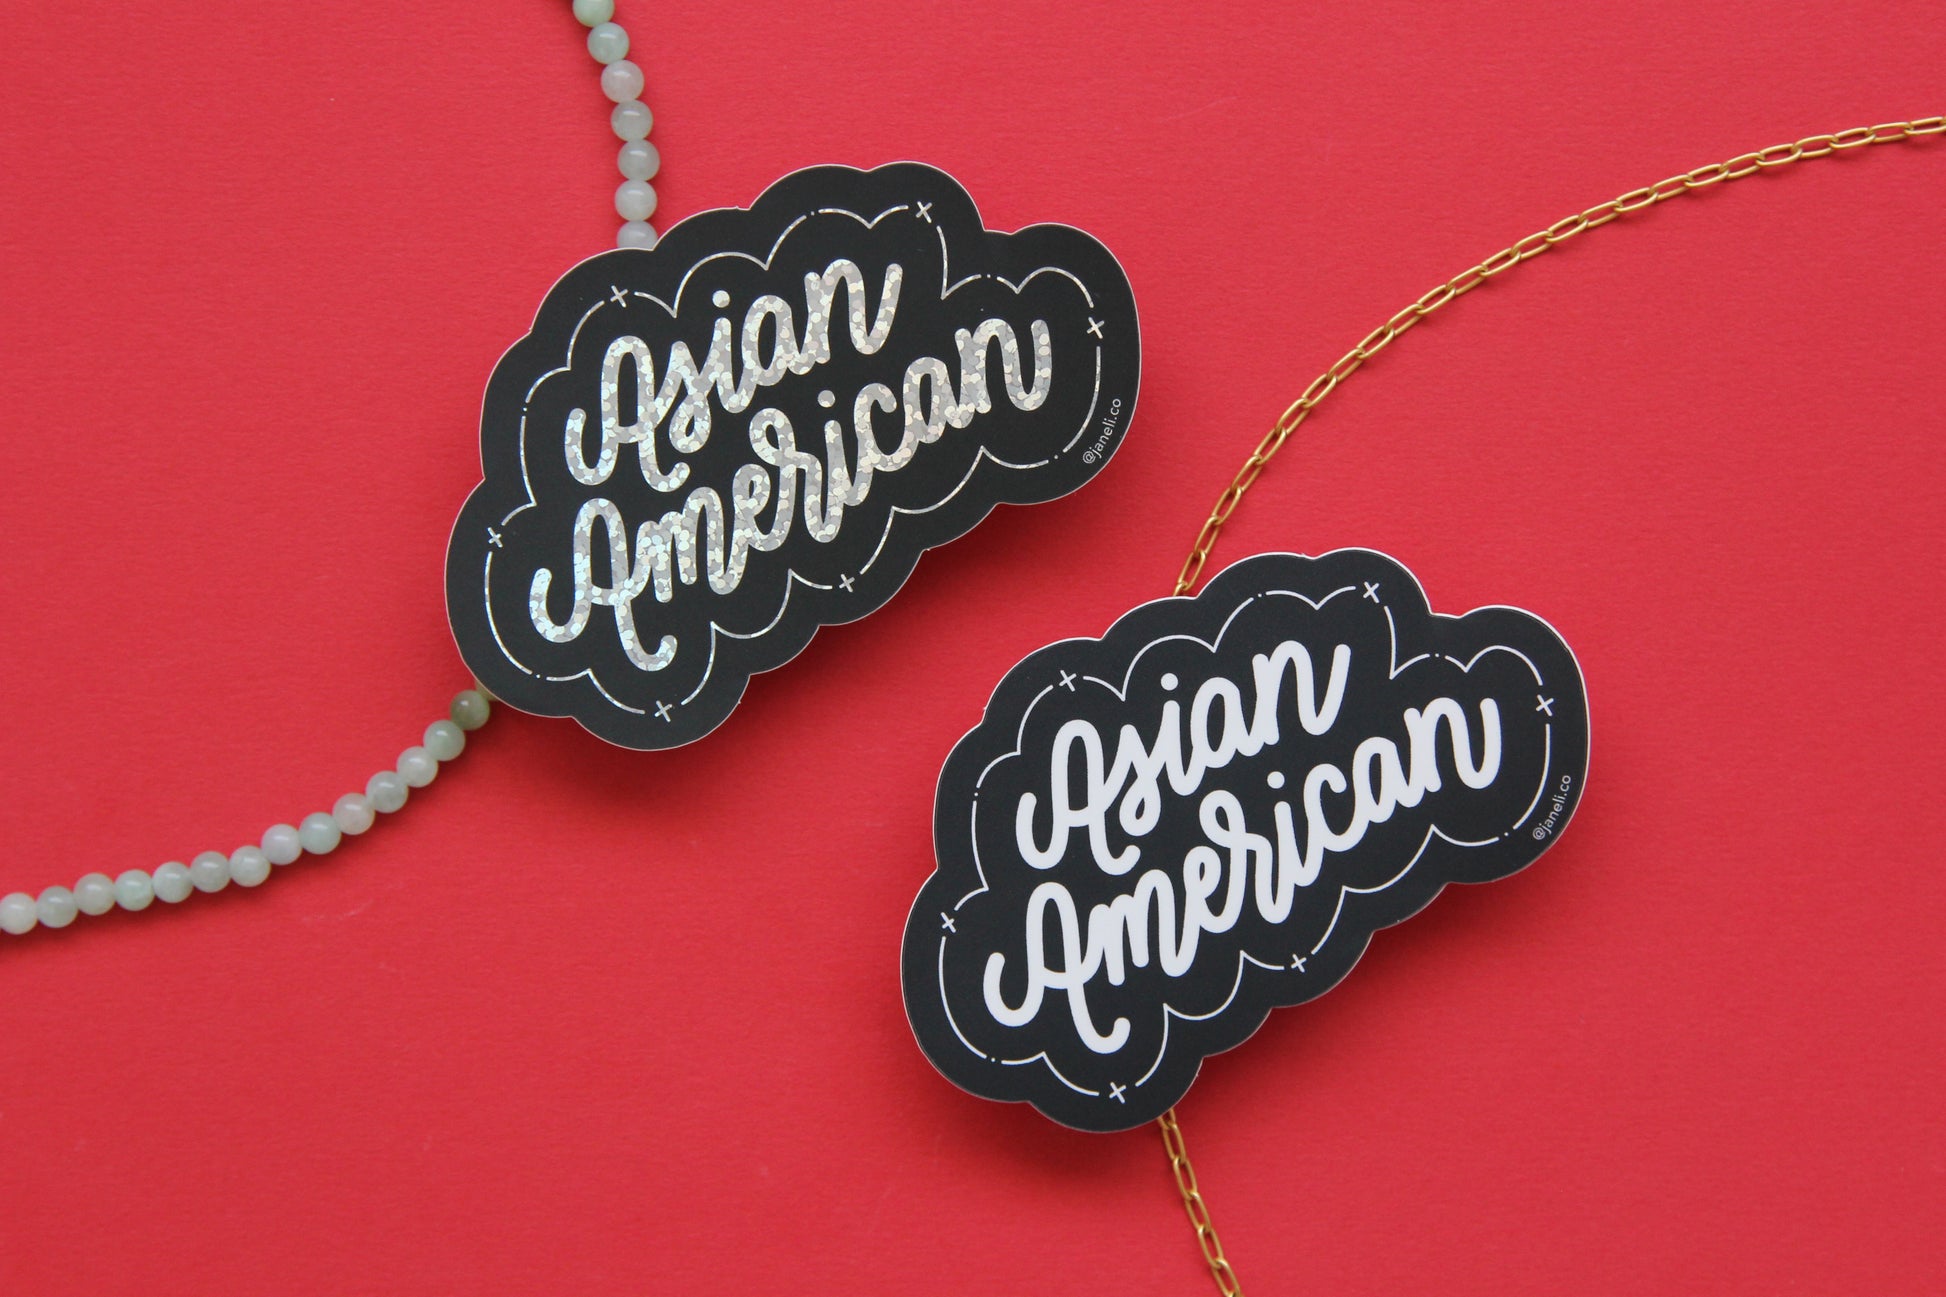 Two JaneLi.Co stickers that say "Asian American" in cursive lettering over a red background with a string of green jade and a thin gold chain. One sticker is black and white, and the other sticker is black and metallic glitter.